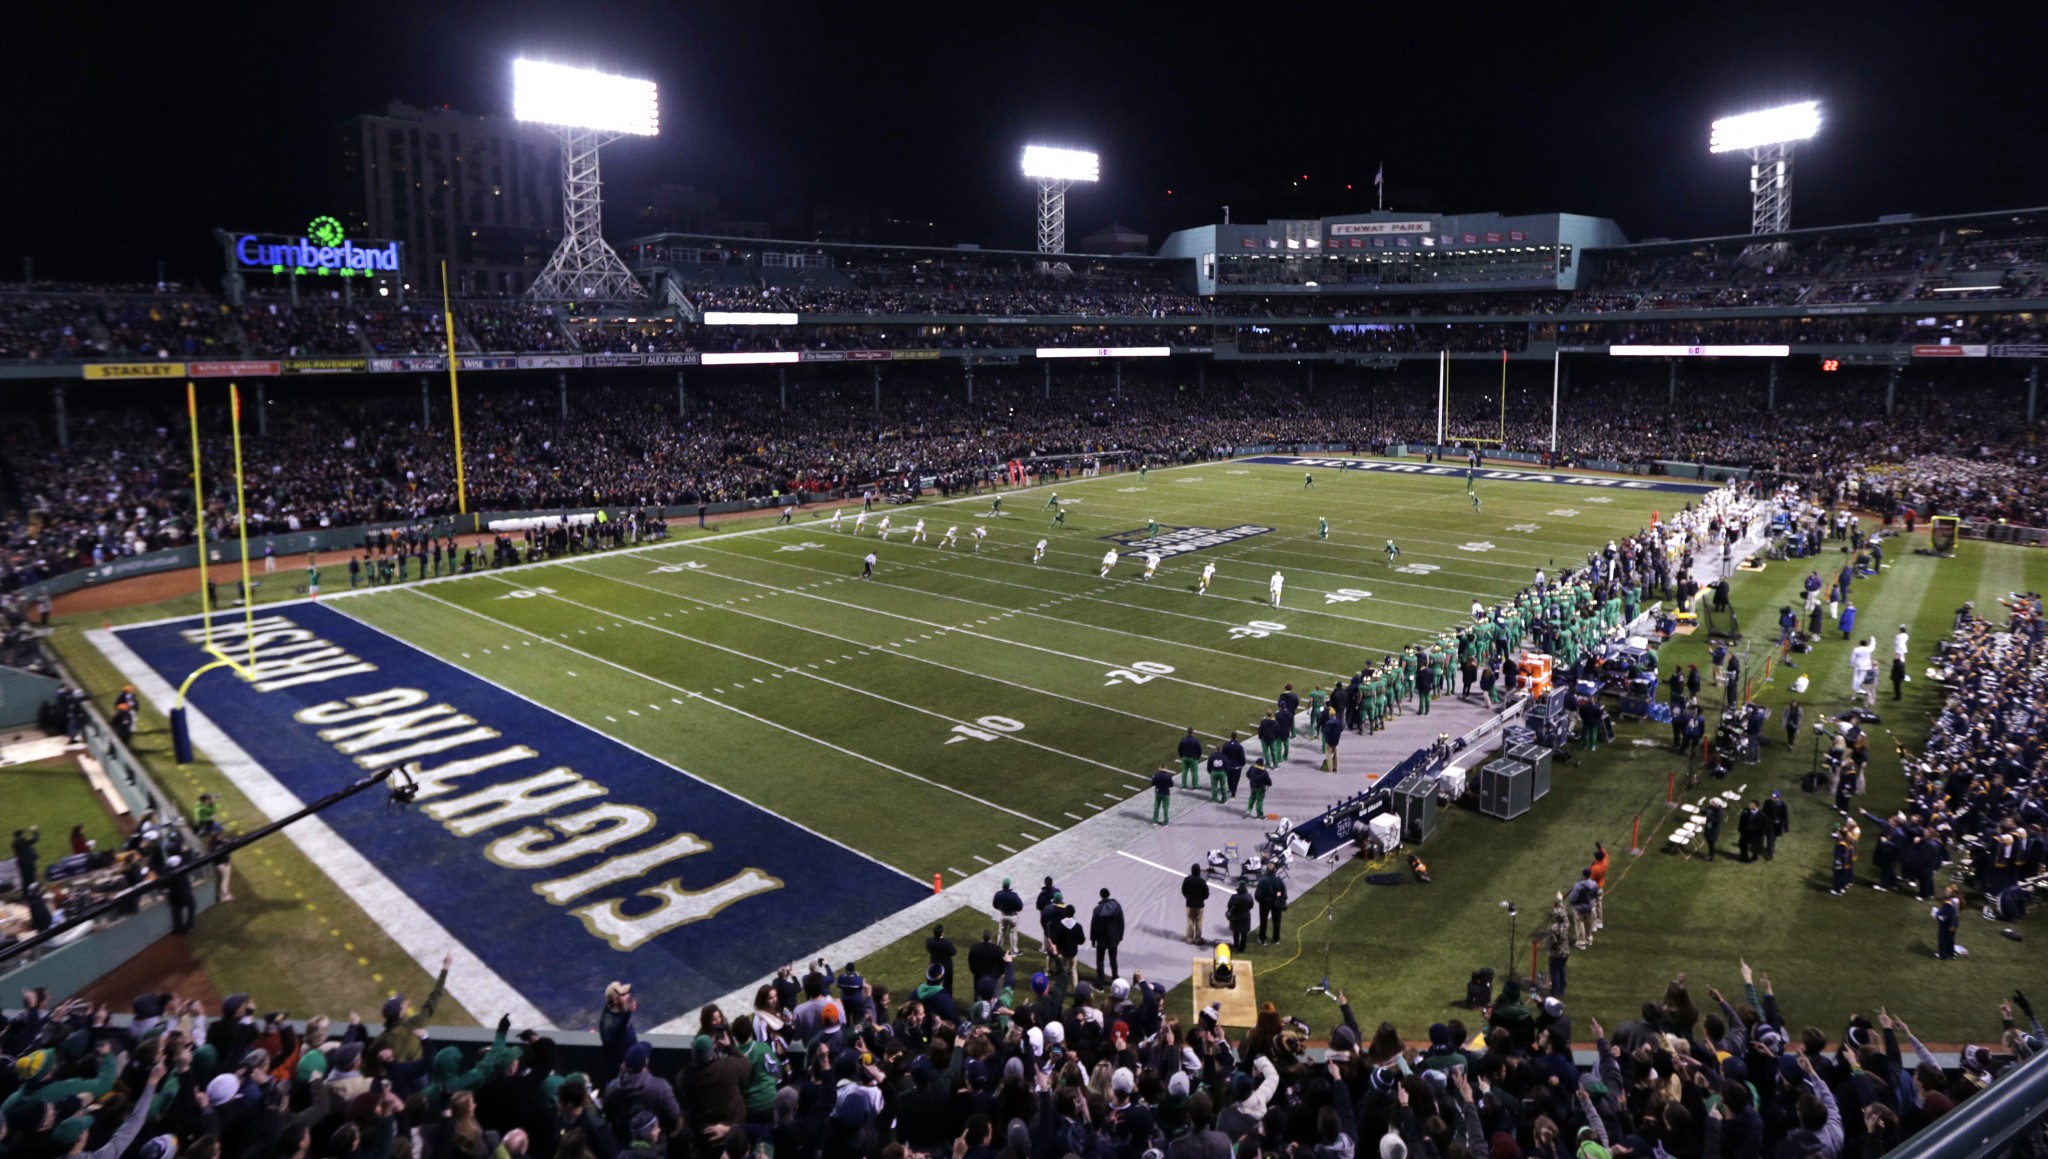 Boston College kicks to Notre Dame on the opening kickoff during the first quarter of the Shamrock Series NCAA college football game at Fenway Park, home of the Boston Red Sox, in Boston Saturday, Nov. 21, 2015. (AP Photo/Charles Krupa)